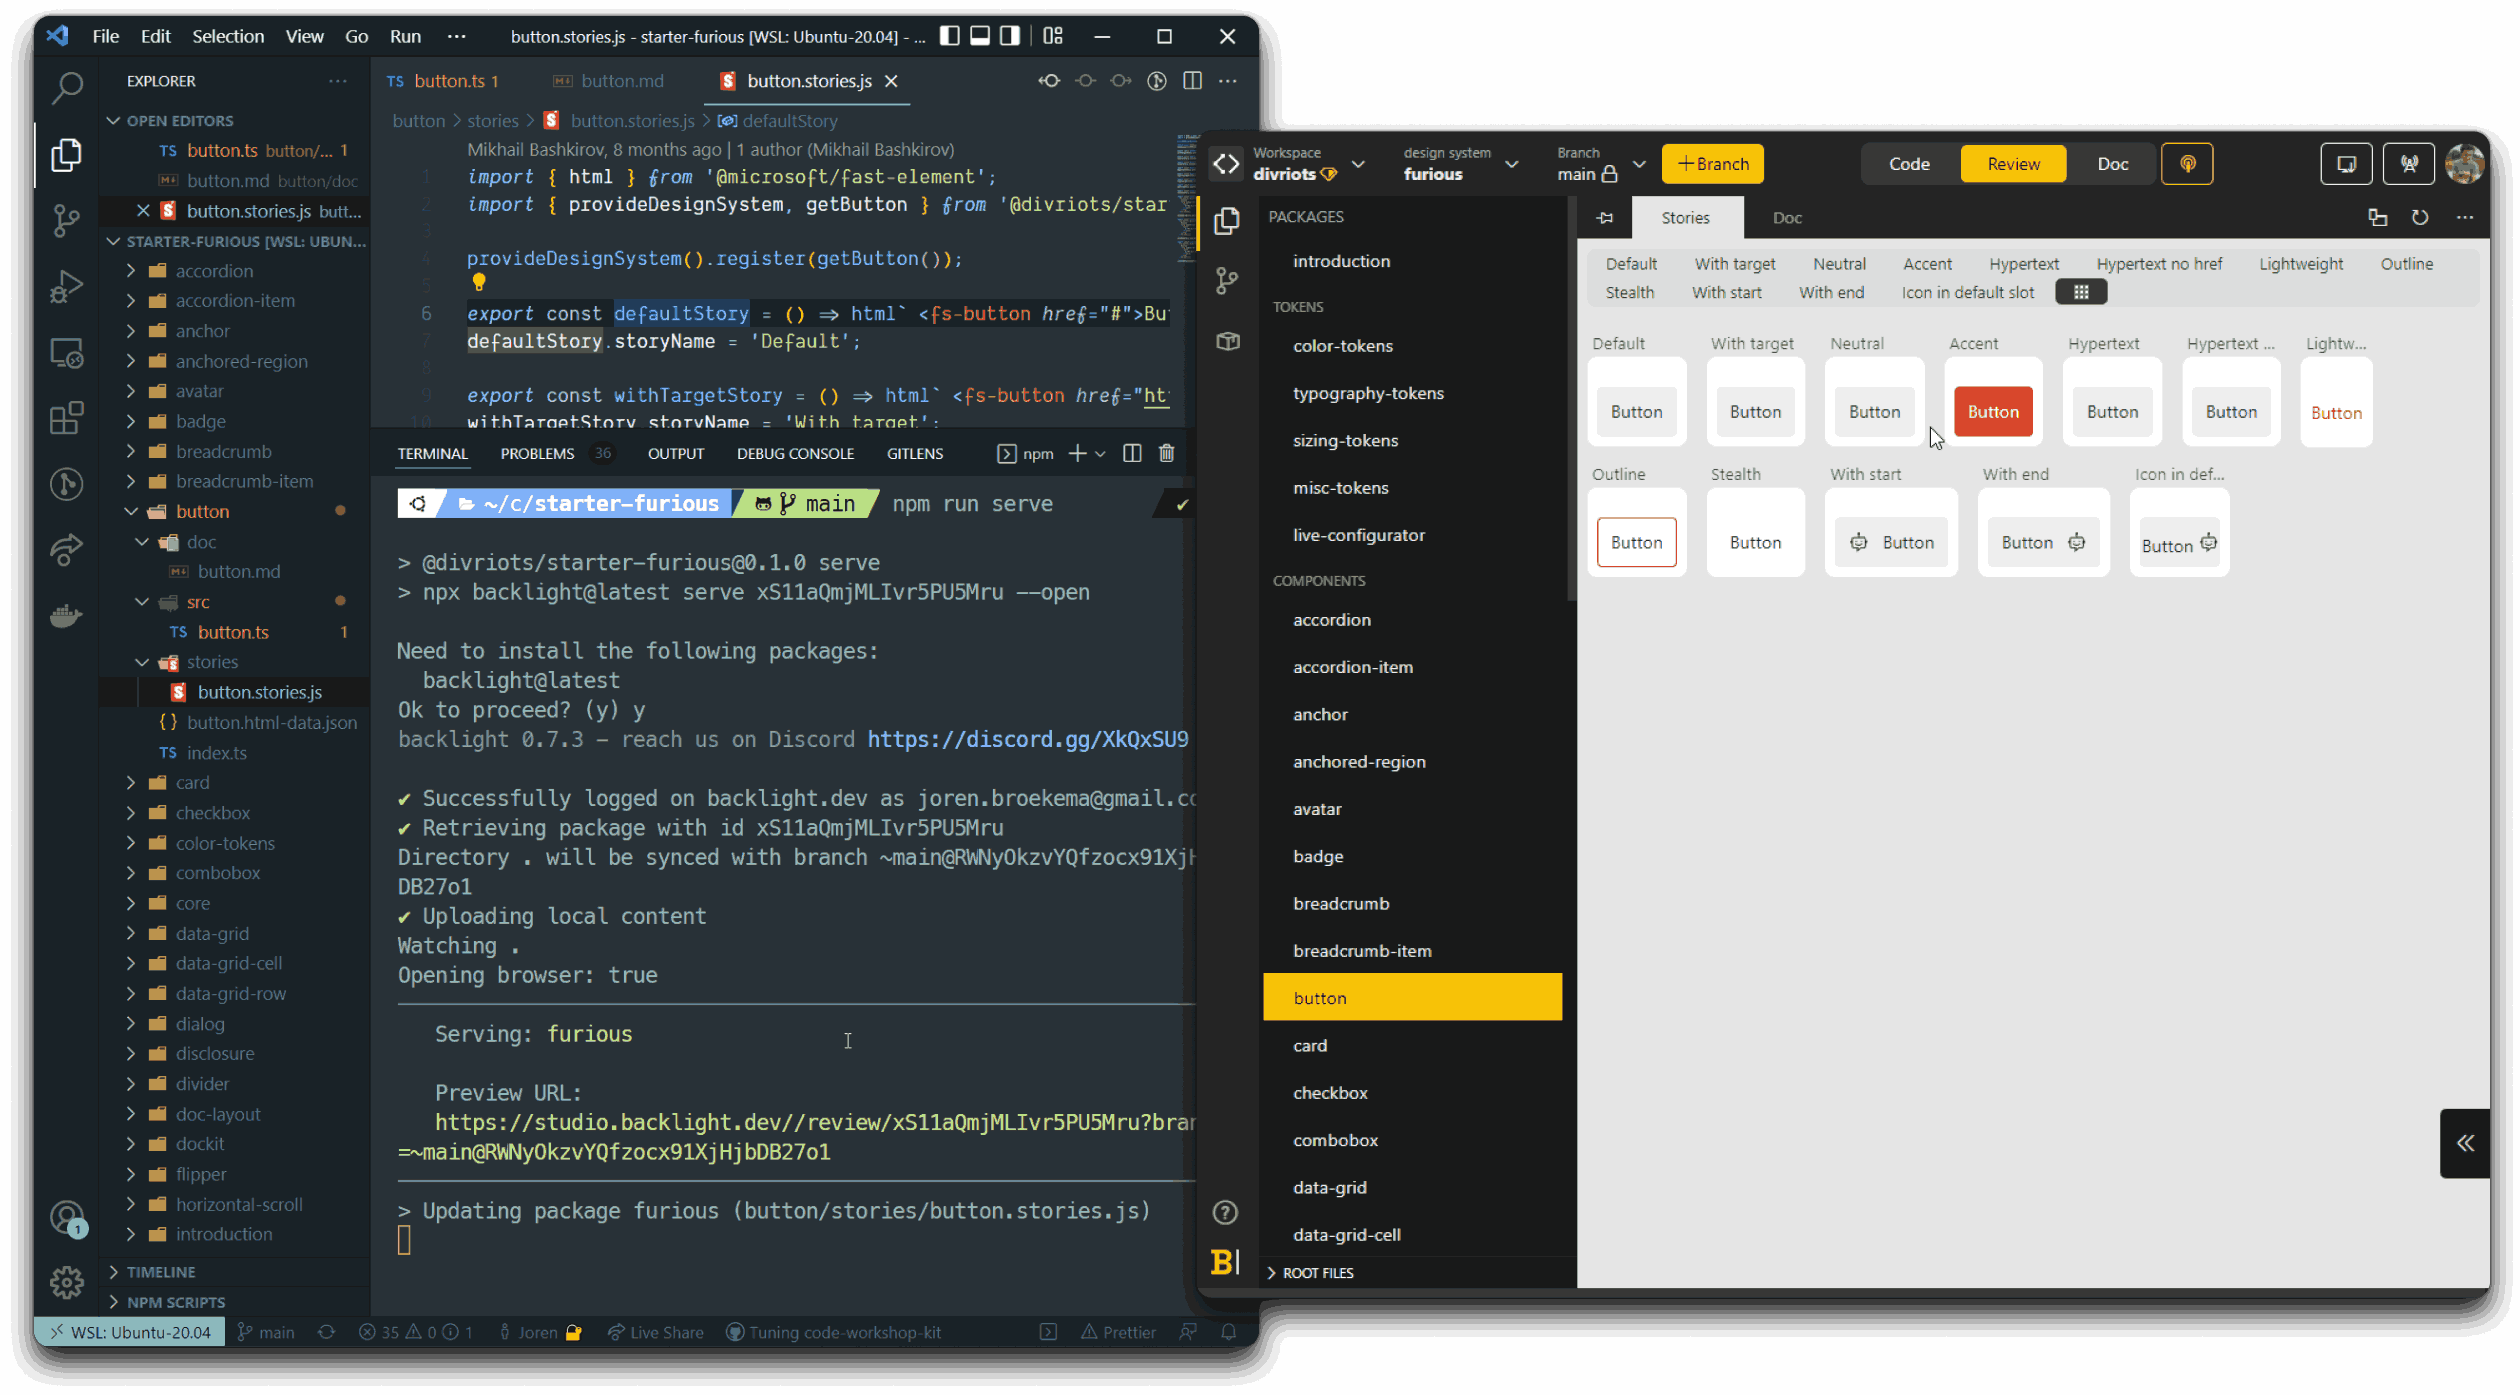 Screenshot of a VScode window containing some of the Simba starter kit's code next to a Backlight window containing some of the Simba starter kit's documentation.